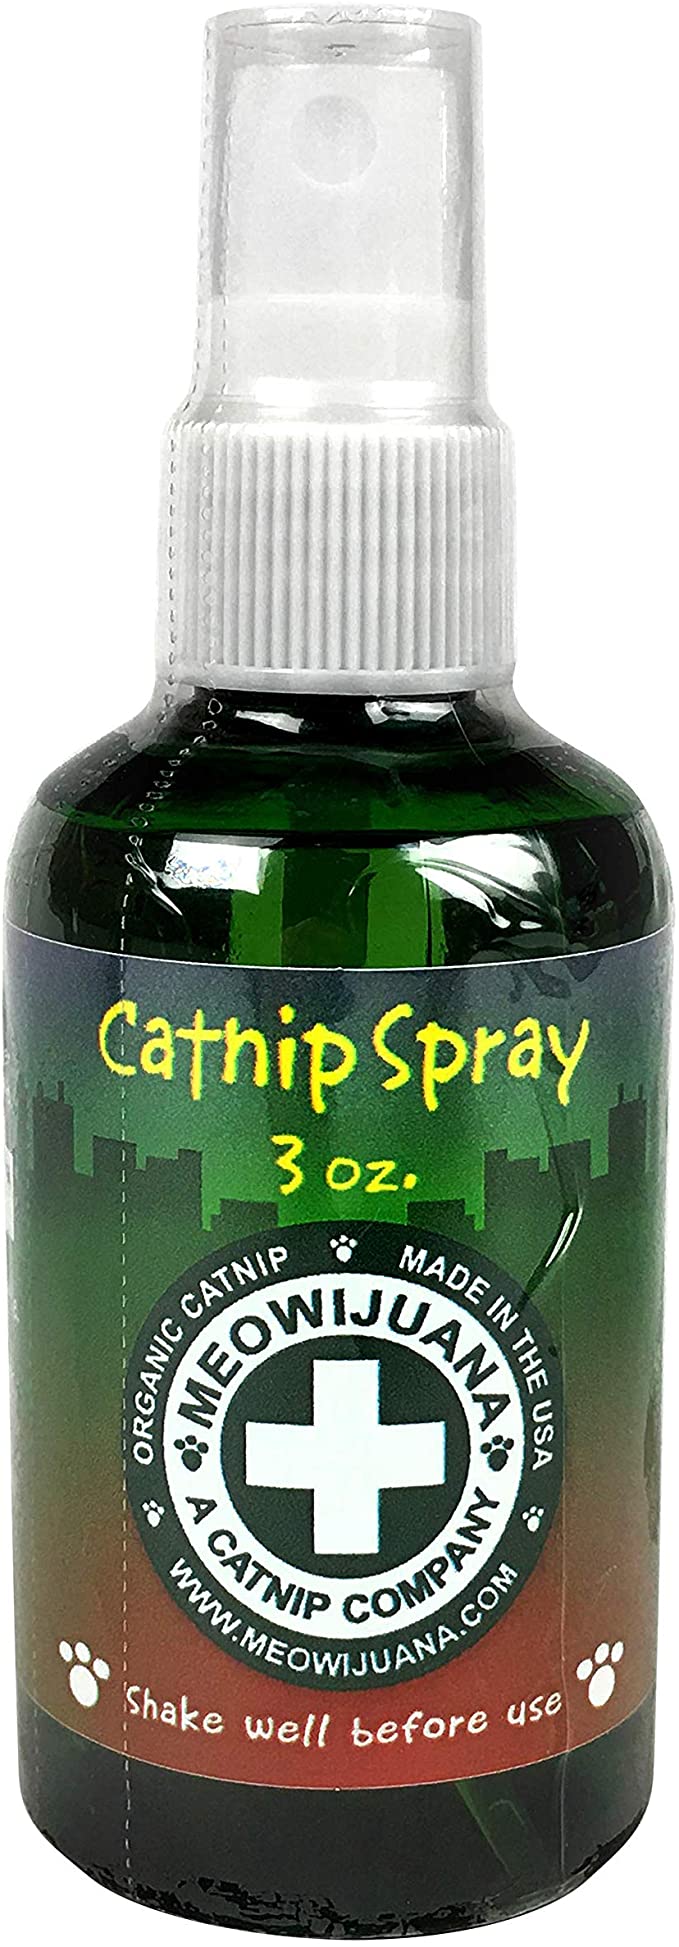 One of the stronger catnip oil sprays on the market, Meowijuana Catnip Spray is made entirely of organic ingredients. It is non-staining and can be sprayed on toys, cat trees, and pet bedding. It is made from essential oil extracted from hand-picked plants. This spray is available in 1-ounce and 3-ounce plastic bottles and contains no artificial ingredients, fillers, or preservatives.<br />
Many cats can become irrational with just one or two sprays. Applying it when they are typically out of sight may be a good idea because some cats are scared of the spray noise. Catnip and honeysuckle, another stimulating plant, are combined in a spray by Meowijuana.